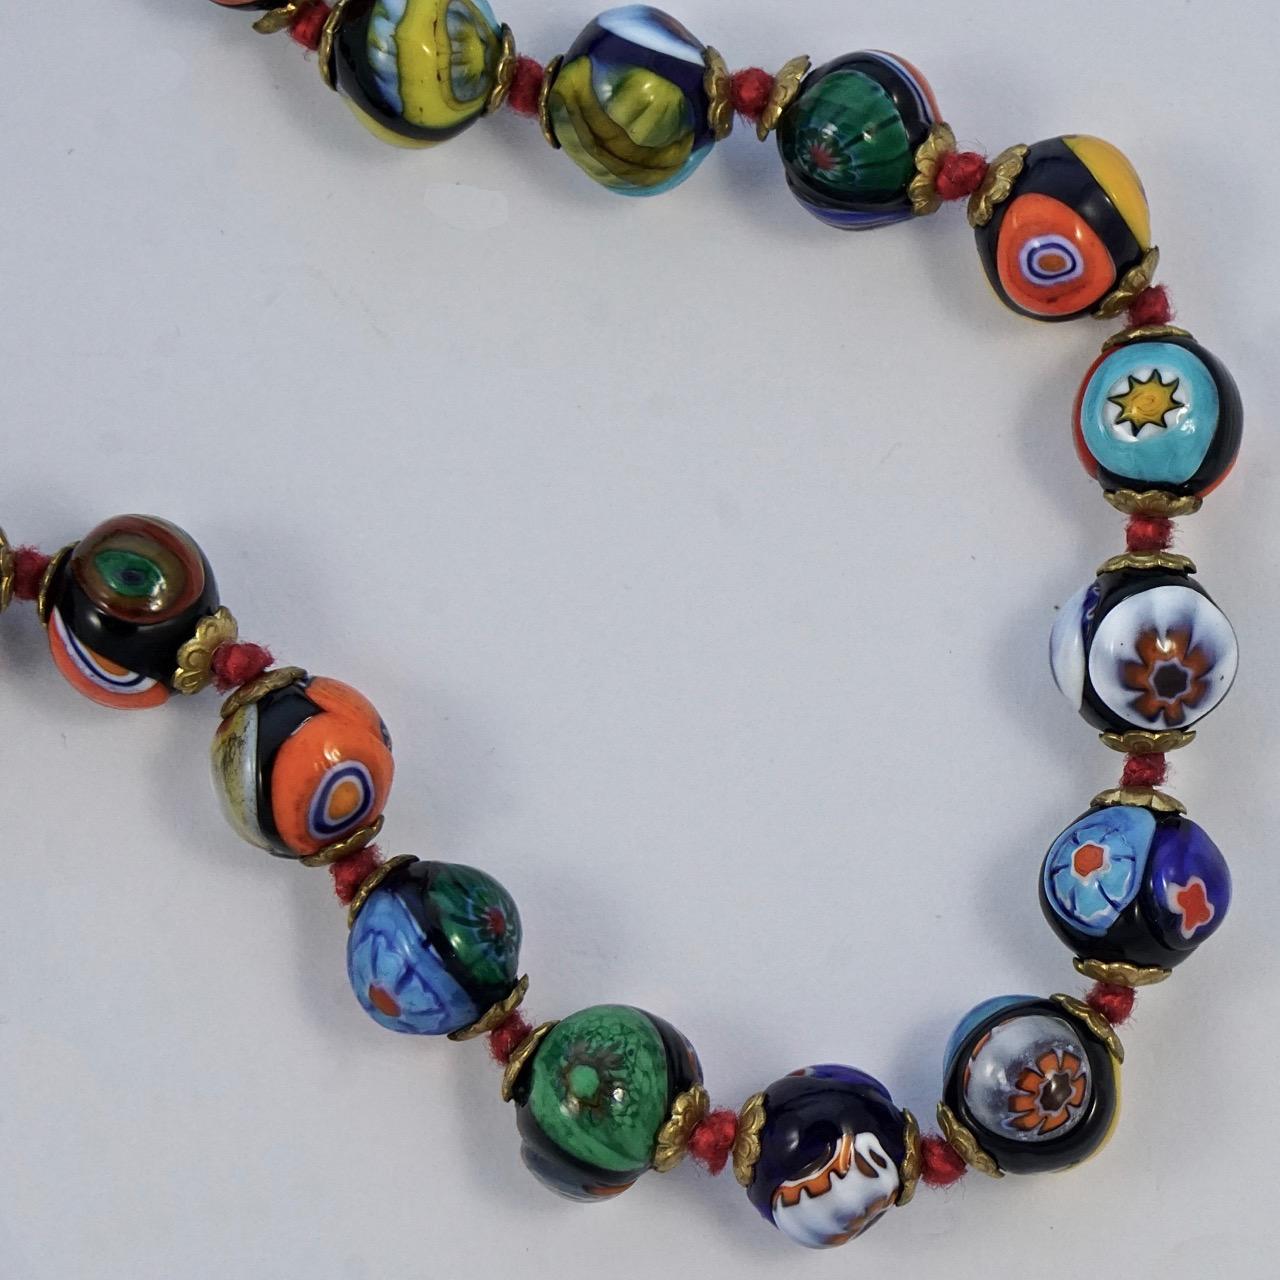 Millefiori Murano Glass Bead Necklace with Barrel Clasp In Good Condition For Sale In London, GB